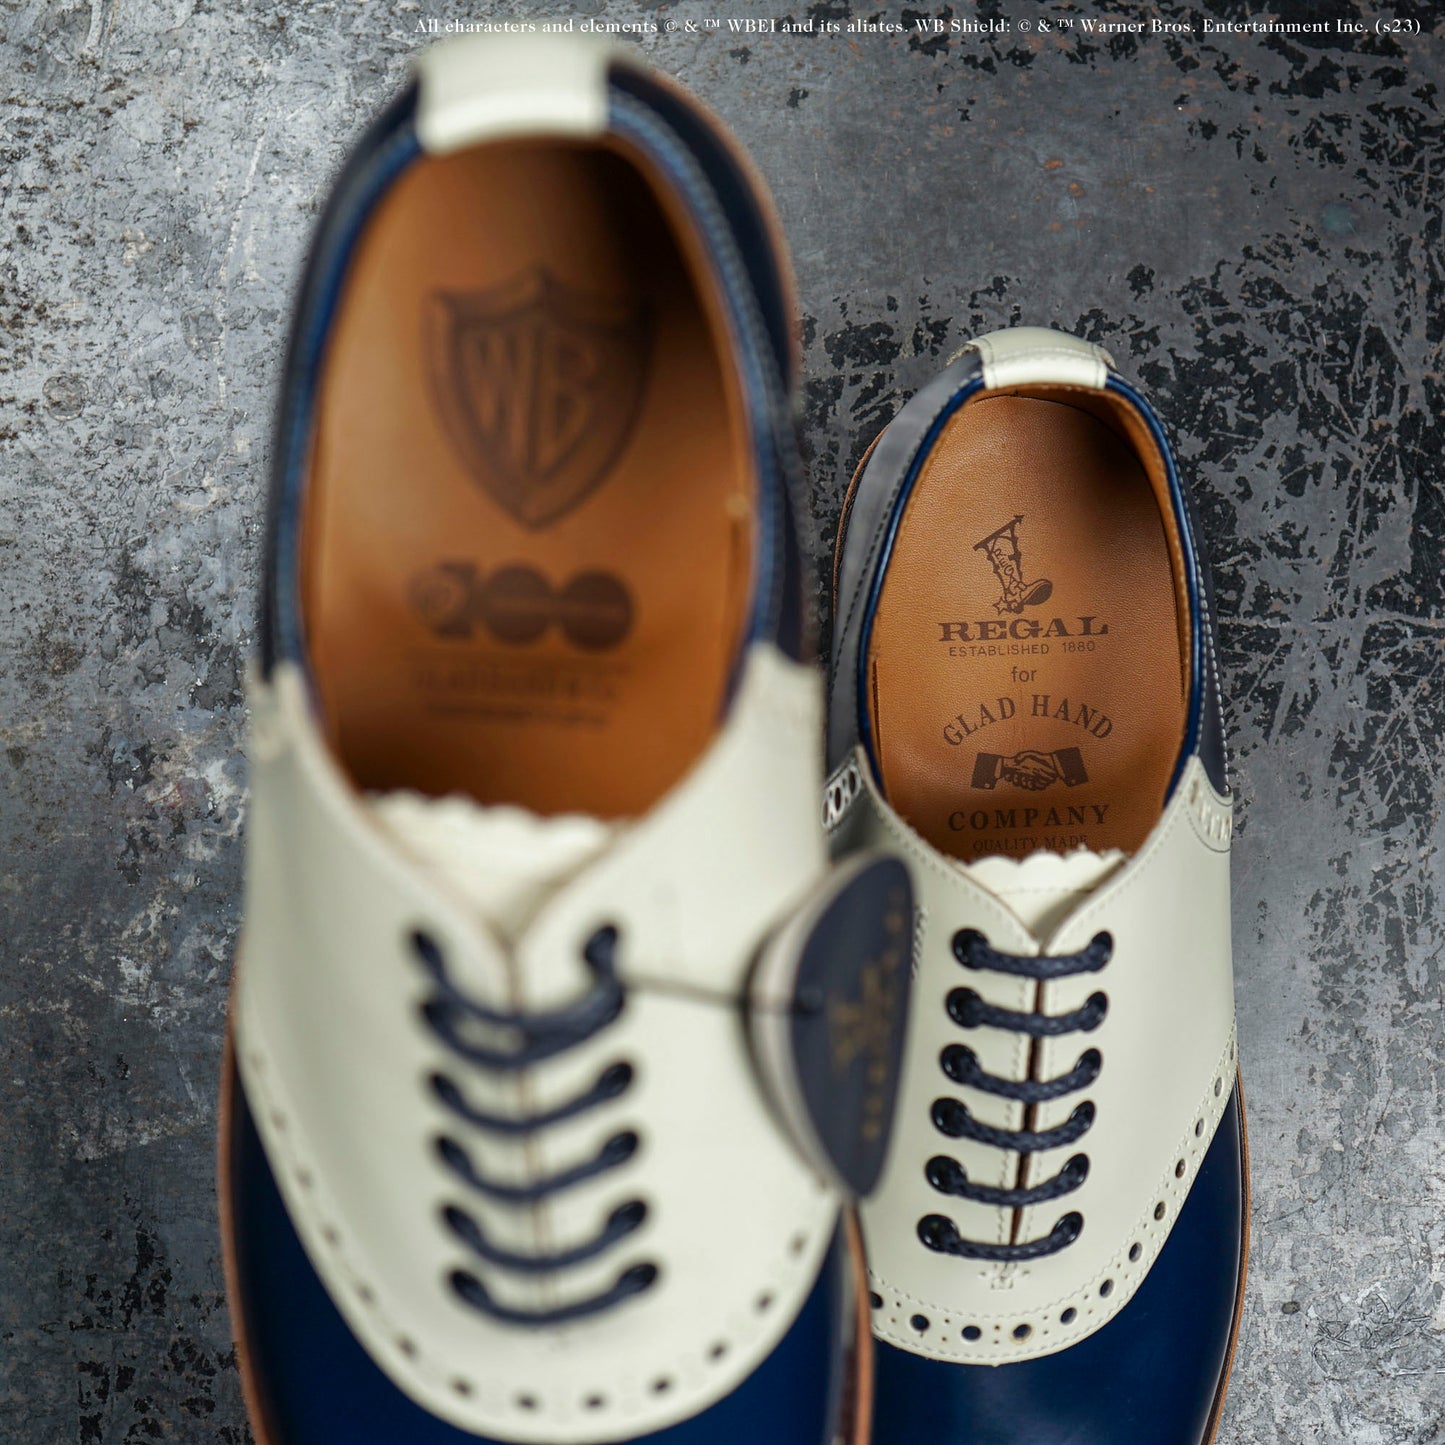 【CORE限定】WARNER BROS. 100TH - SADDLE SHOES